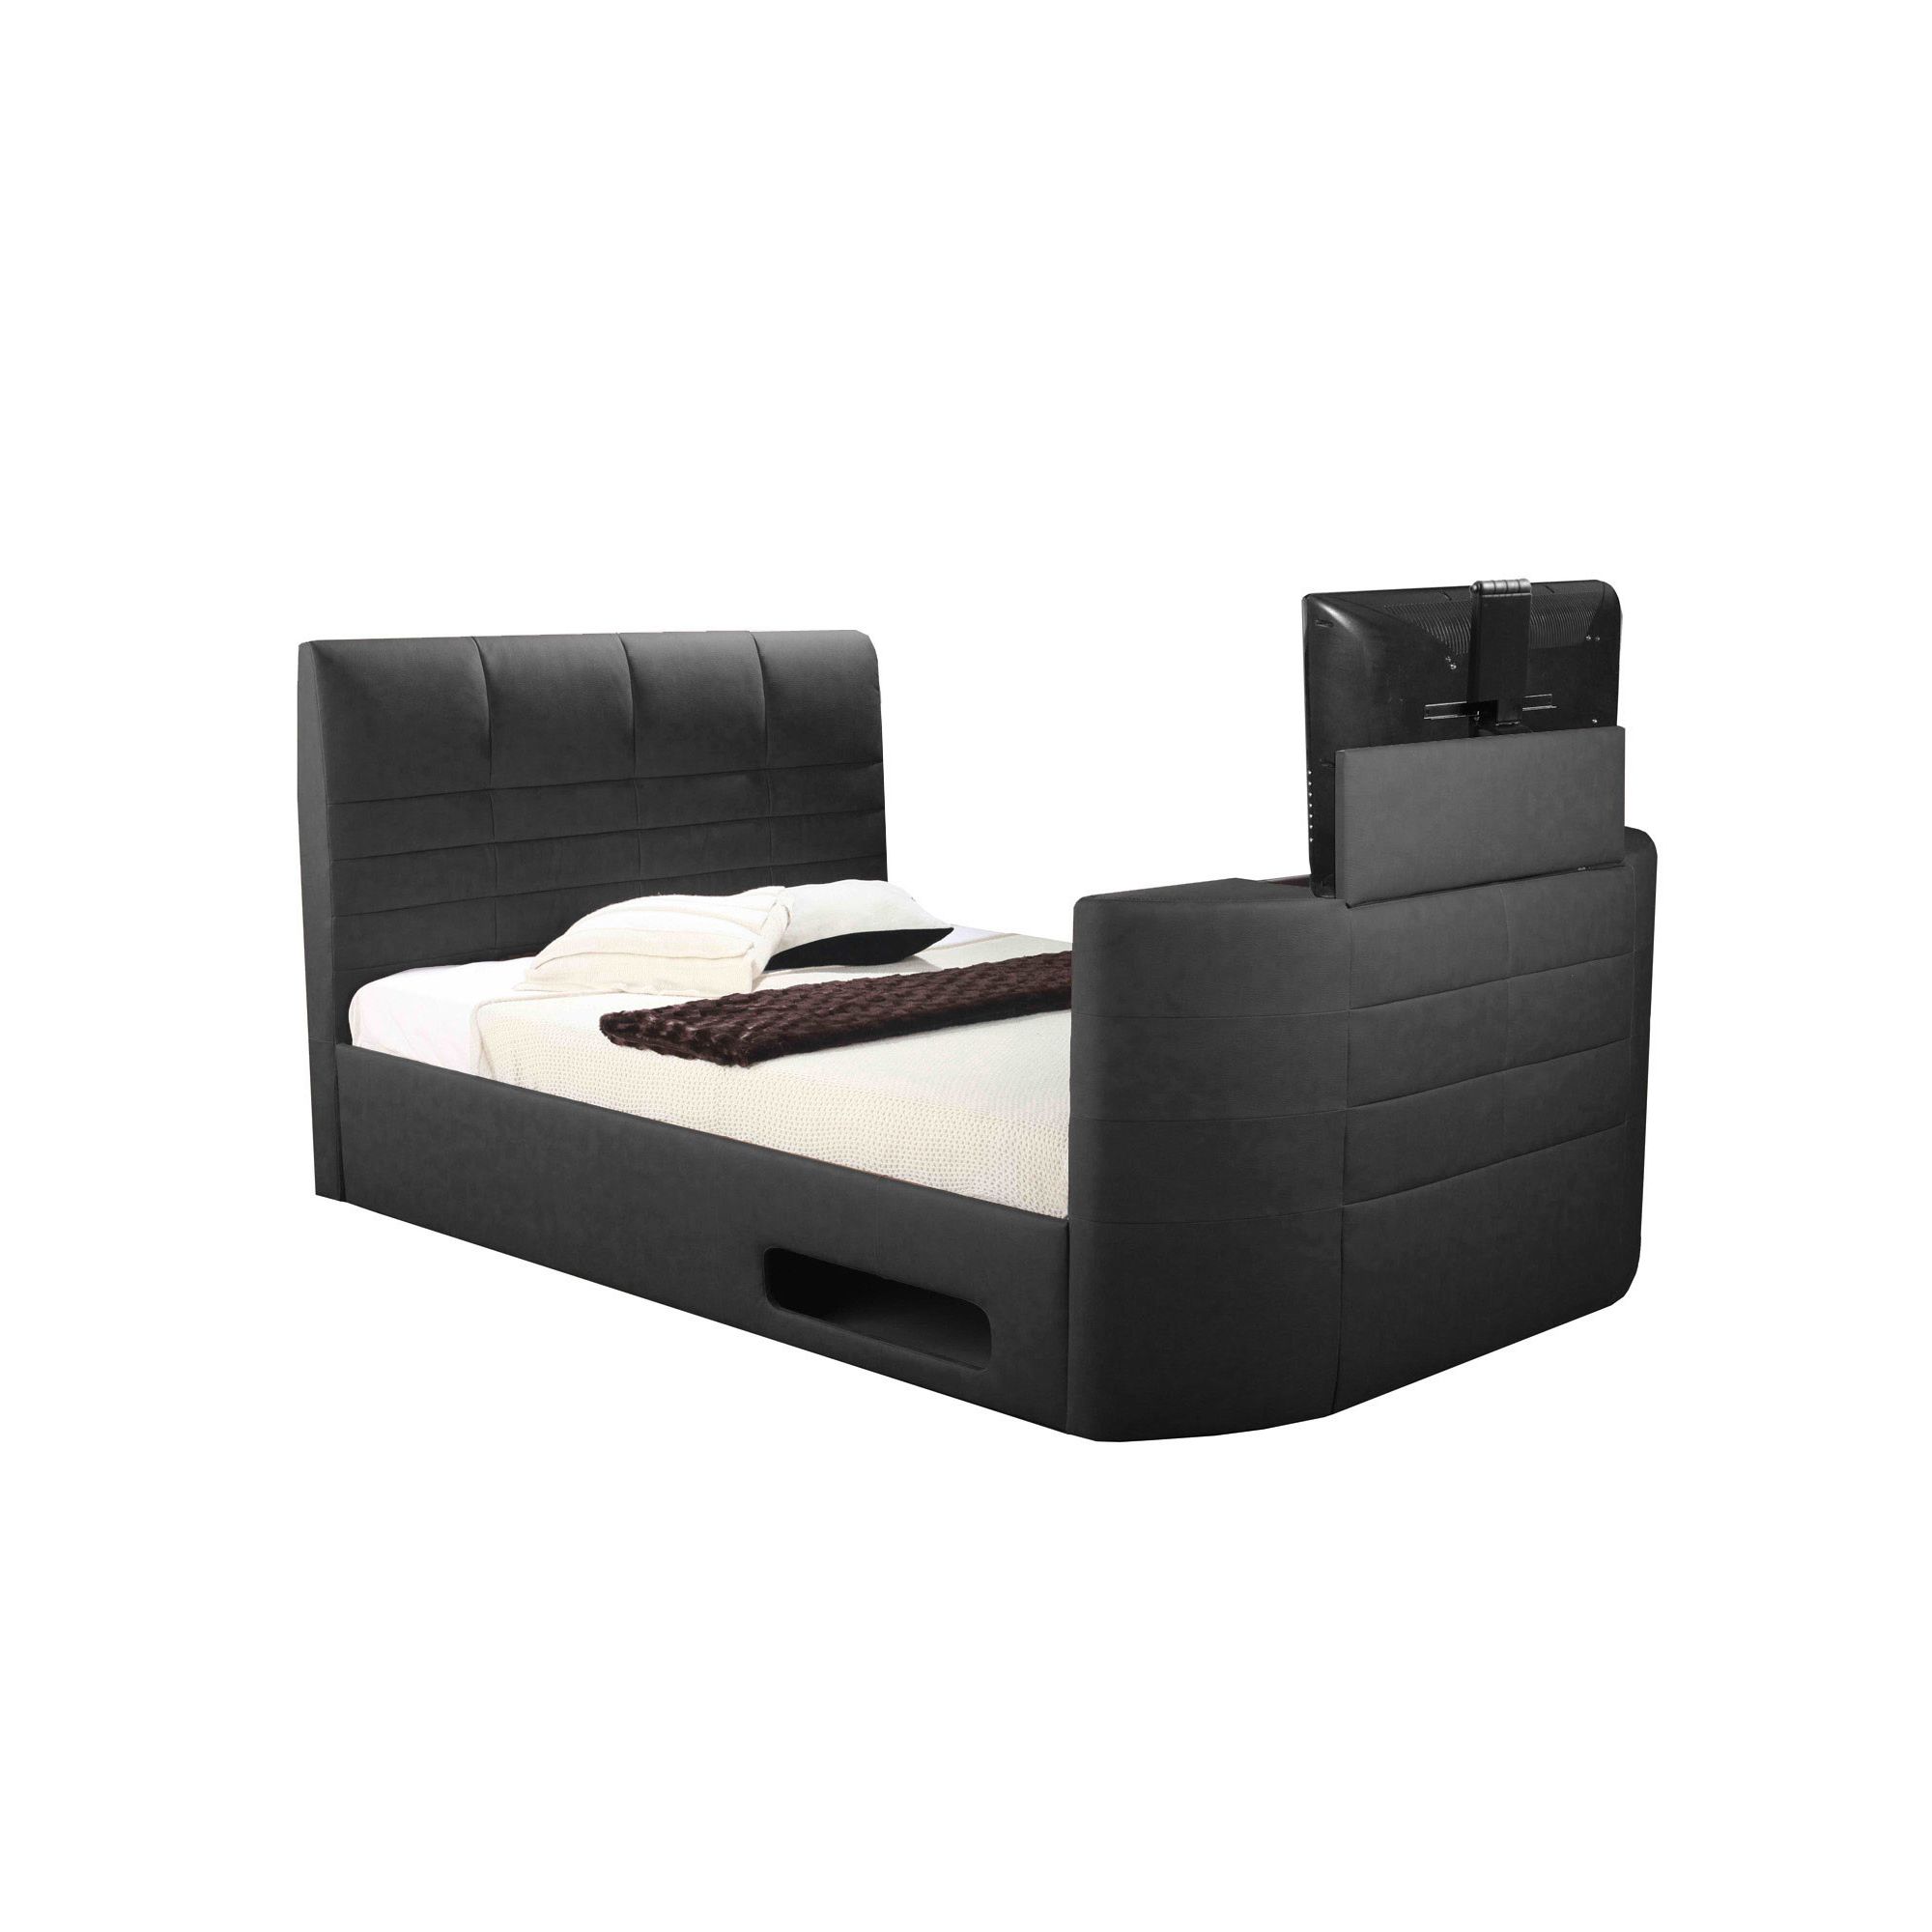 Altruna Miami Electric Wireless TV Bed - Without Ottoman - King - Black at Tesco Direct